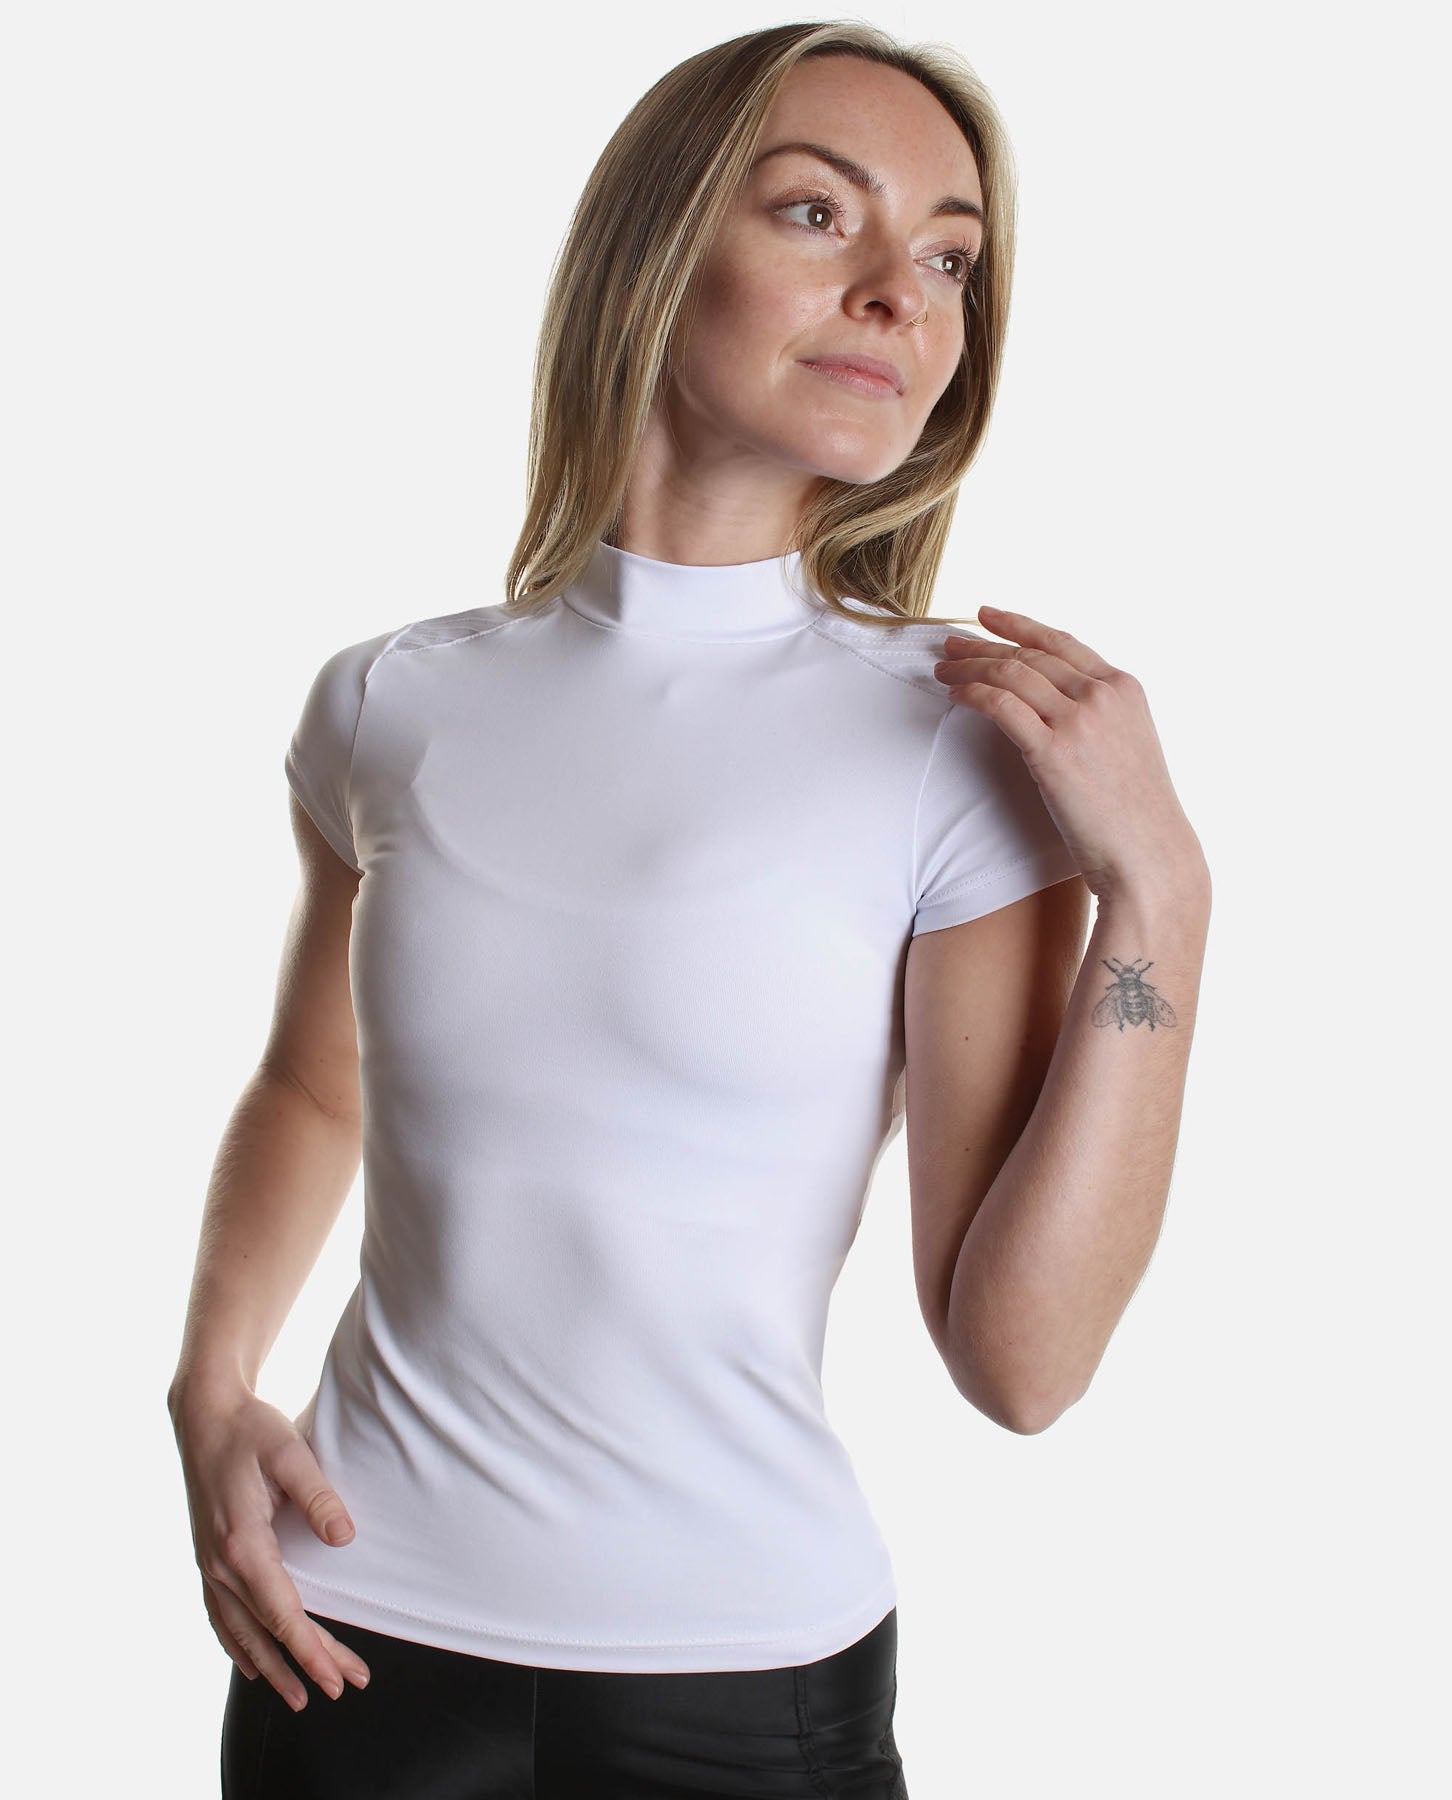 Hold Tight Short Sleeve Top, White F15180 - Trinys Activewear UK ...